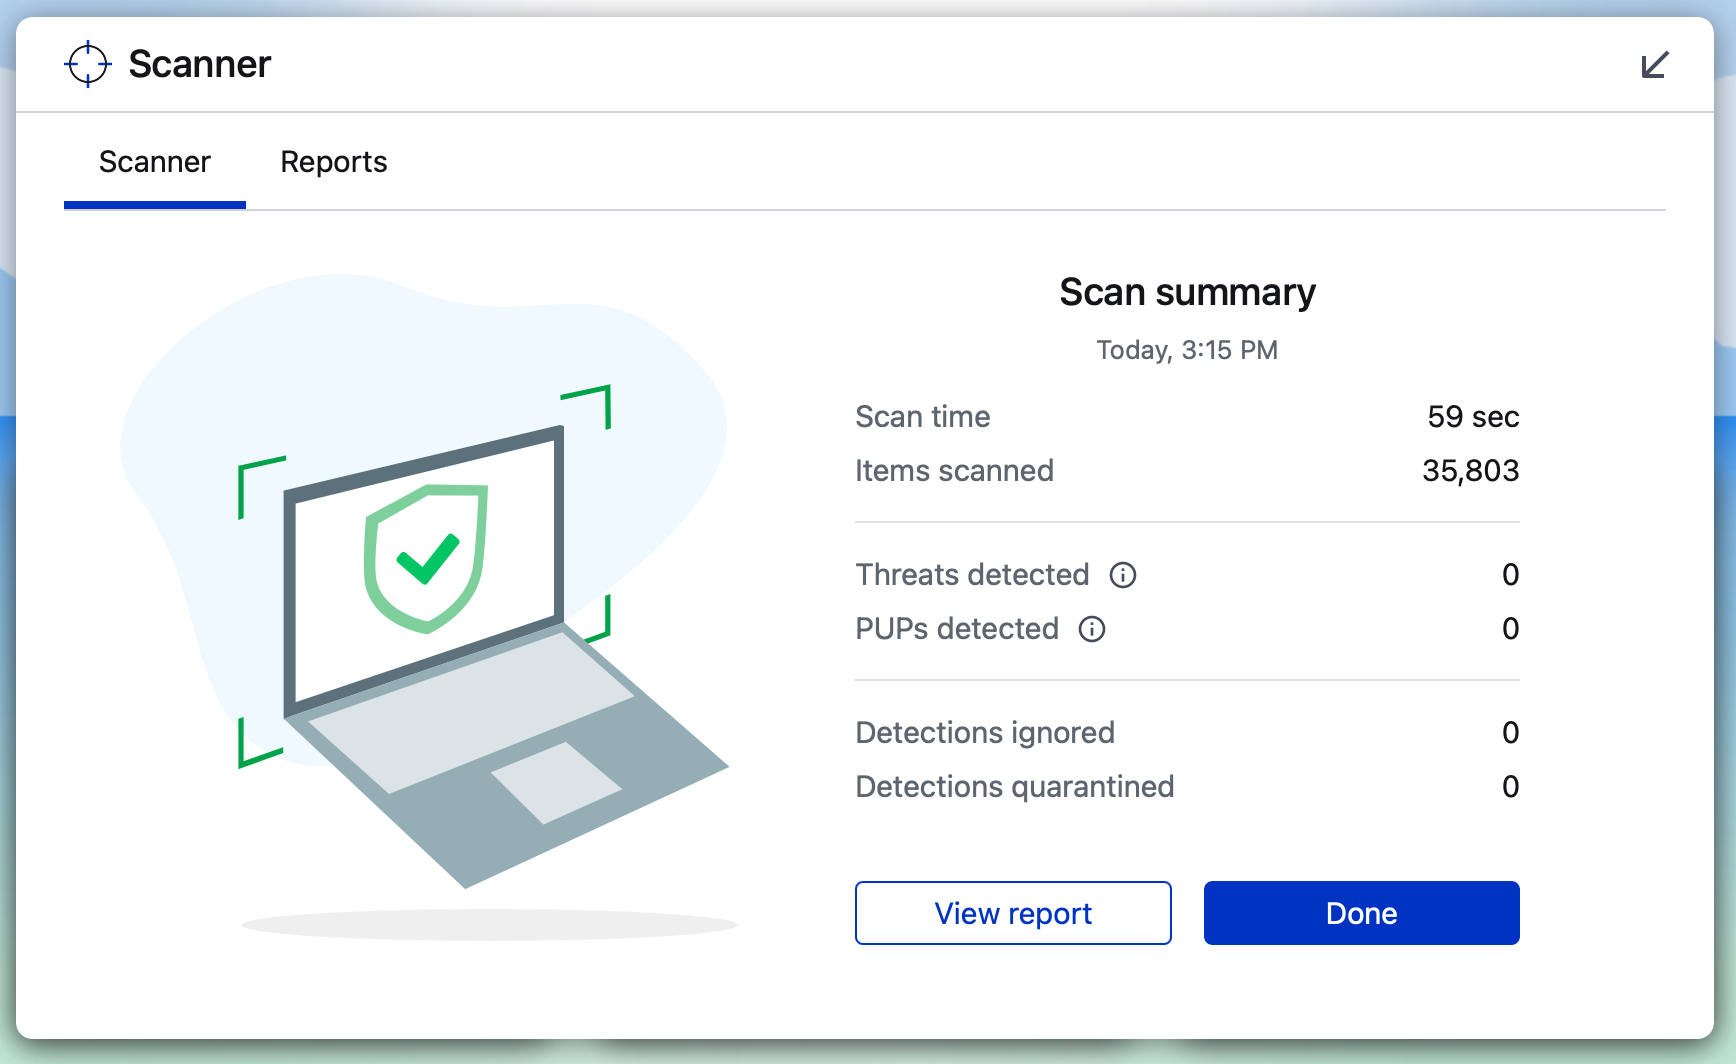 If any threats are detected, follow the recommended actions provided by the security software to remove or quarantine the malware.
Restart your computer after the scan and removal process is complete.